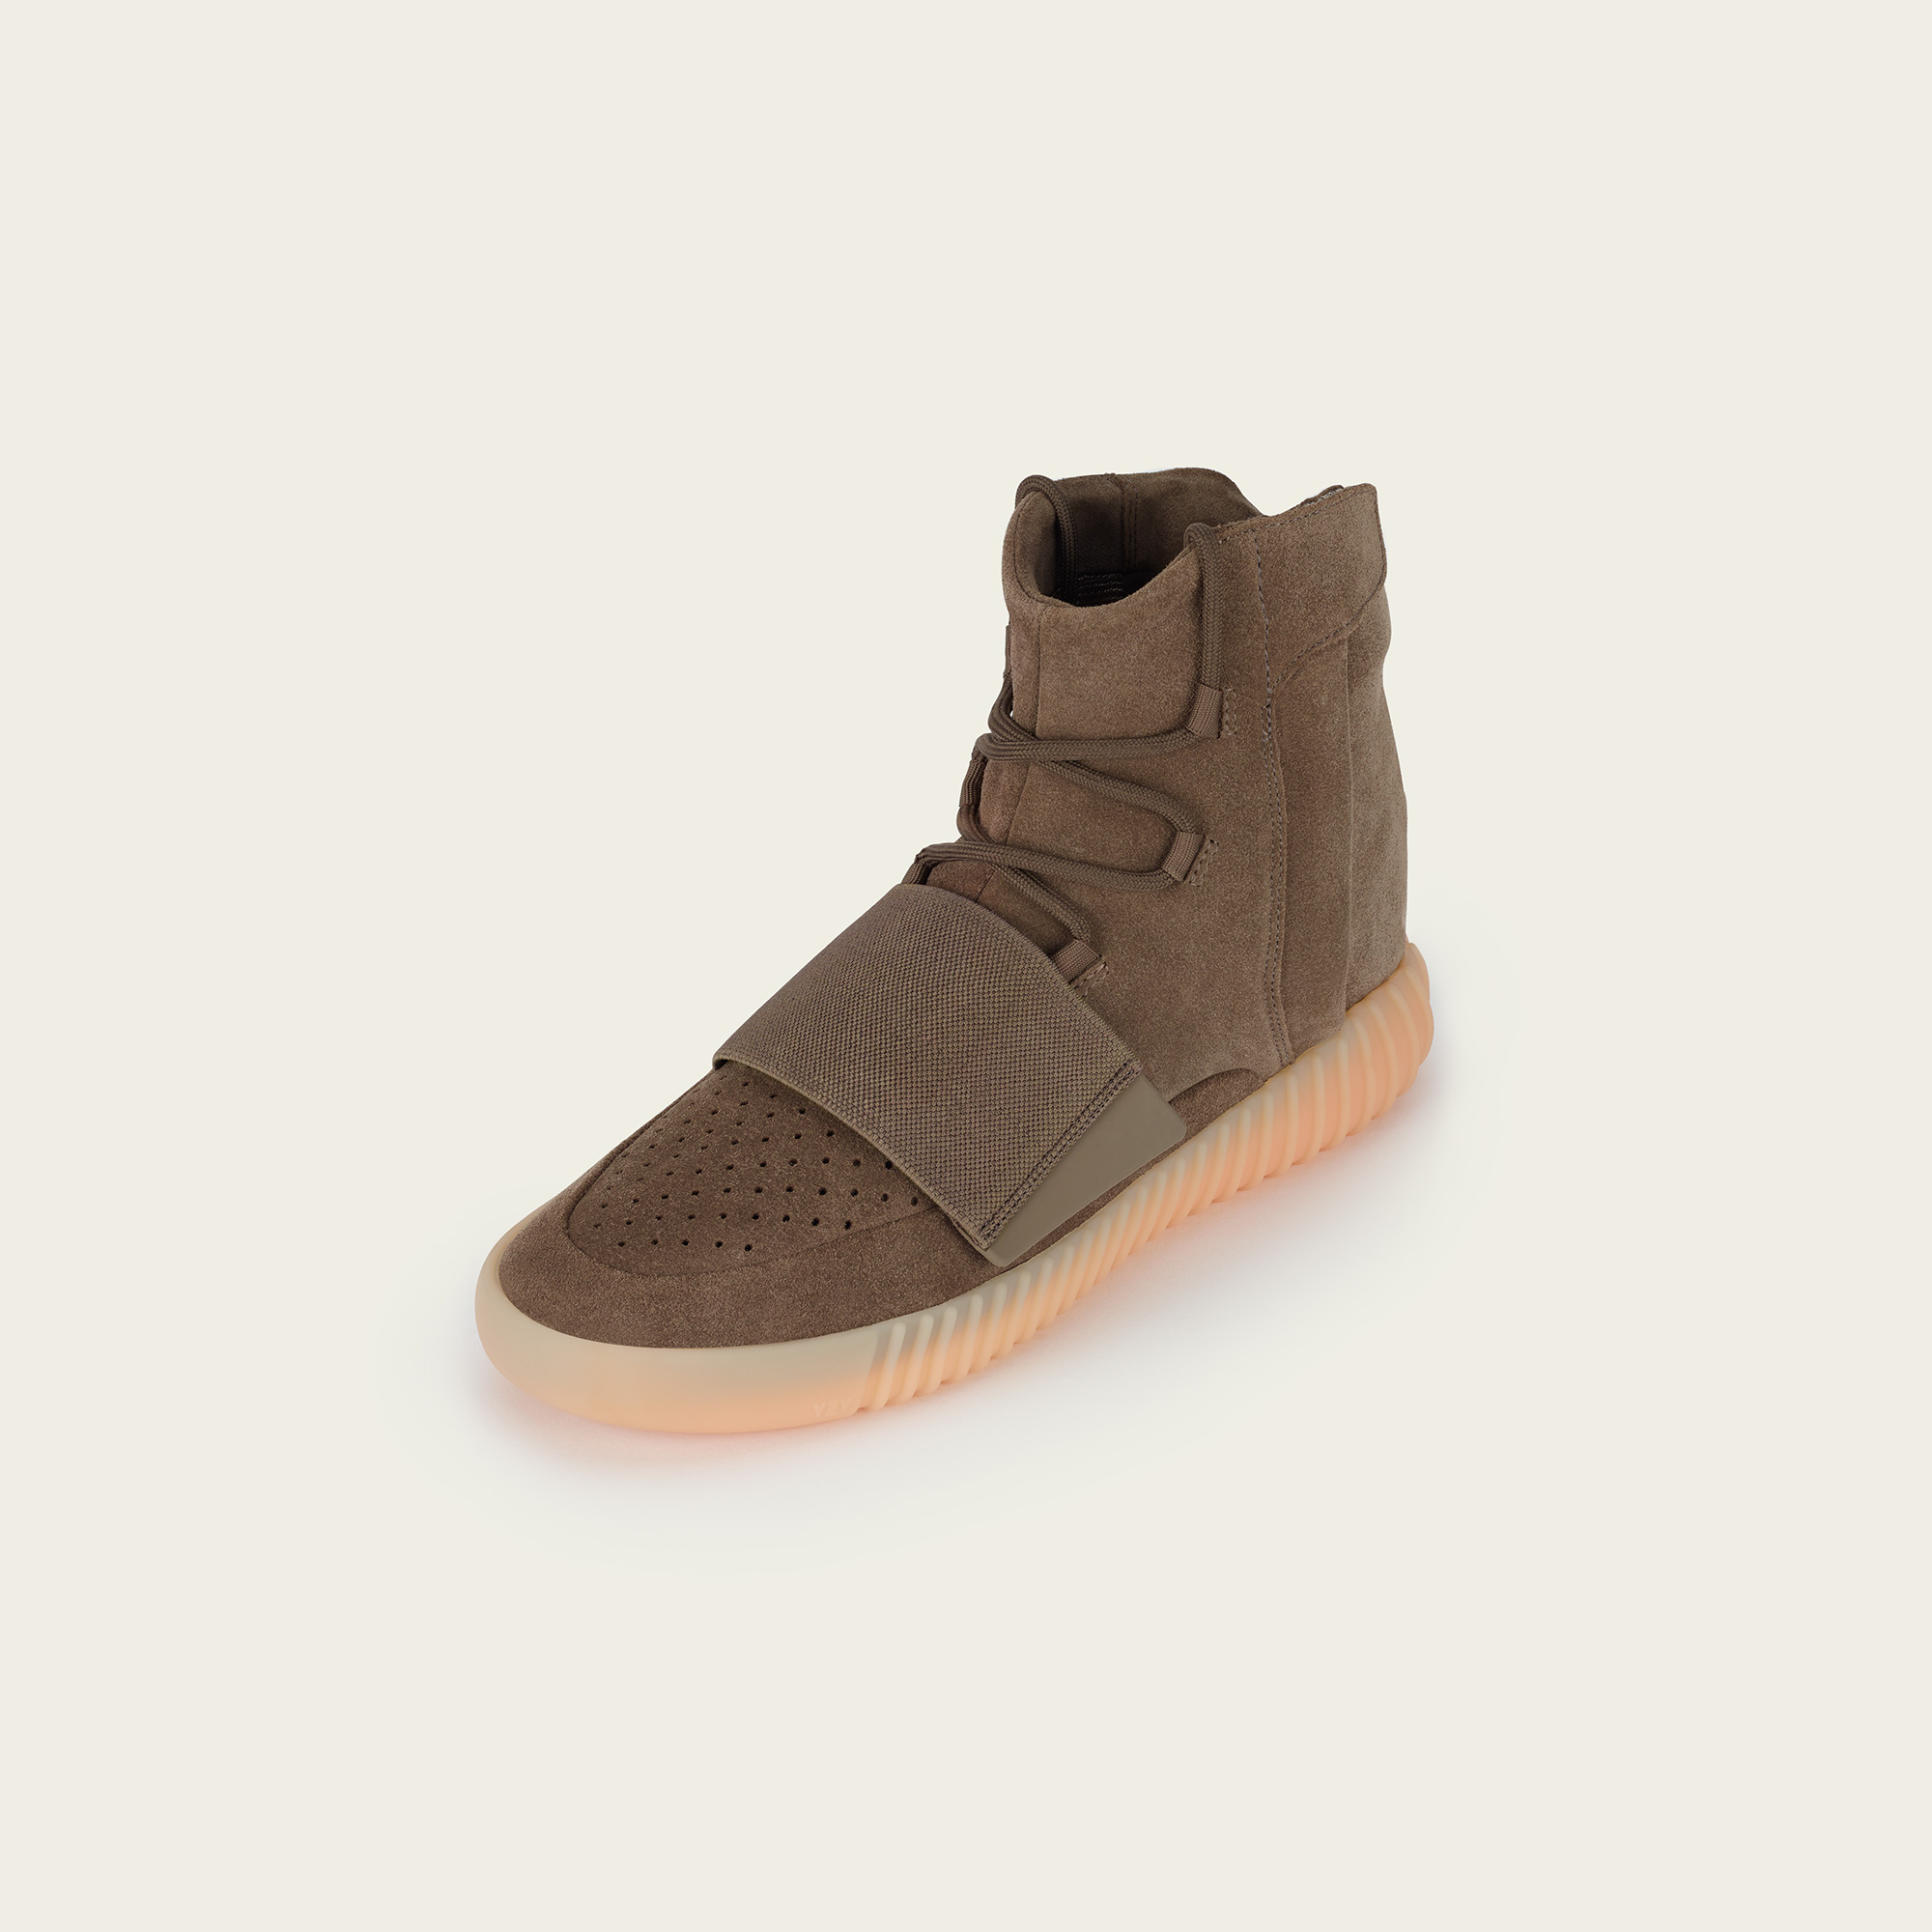 adidas-yeezy-boost-750-brown-1